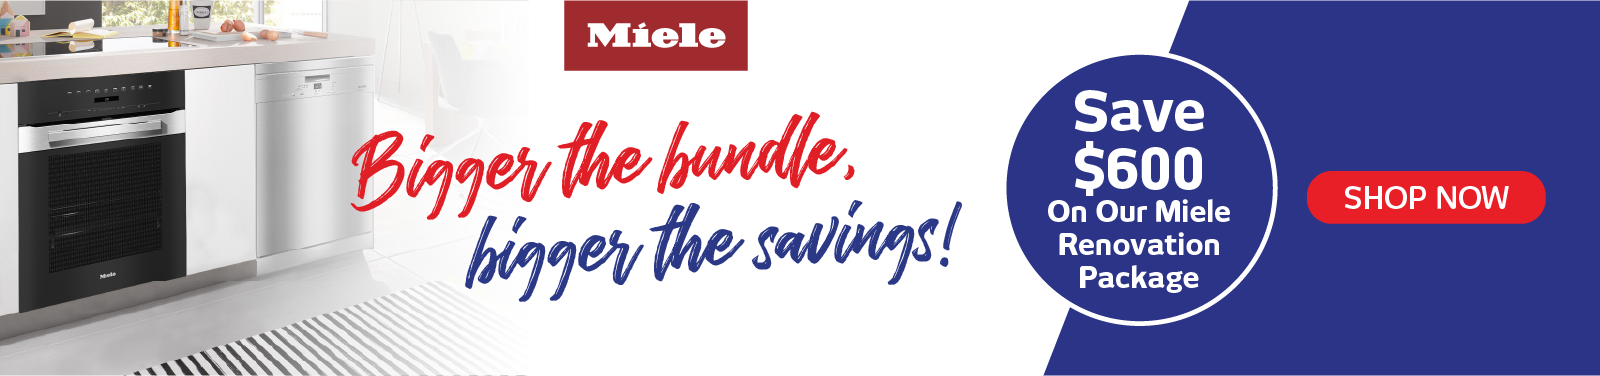 Save $600 On Our Miele Renovation Kitchen Package!